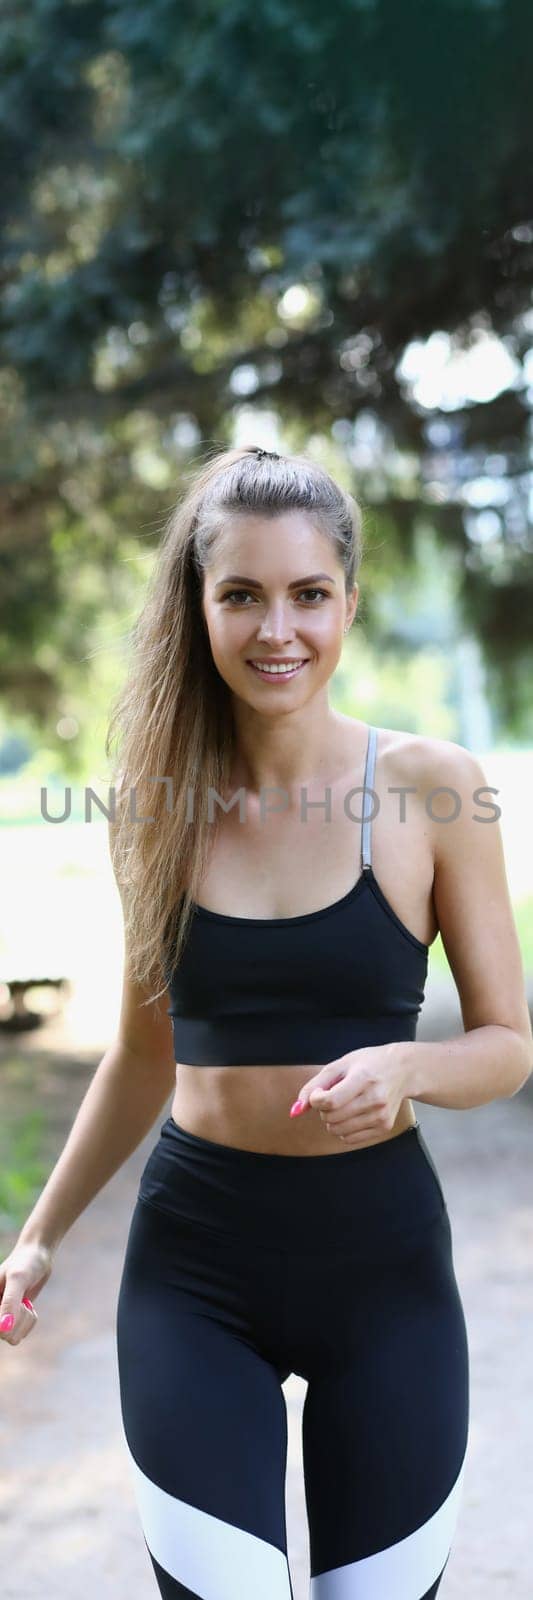 Portrait of happy positive cheerful girl jogging in park by kuprevich